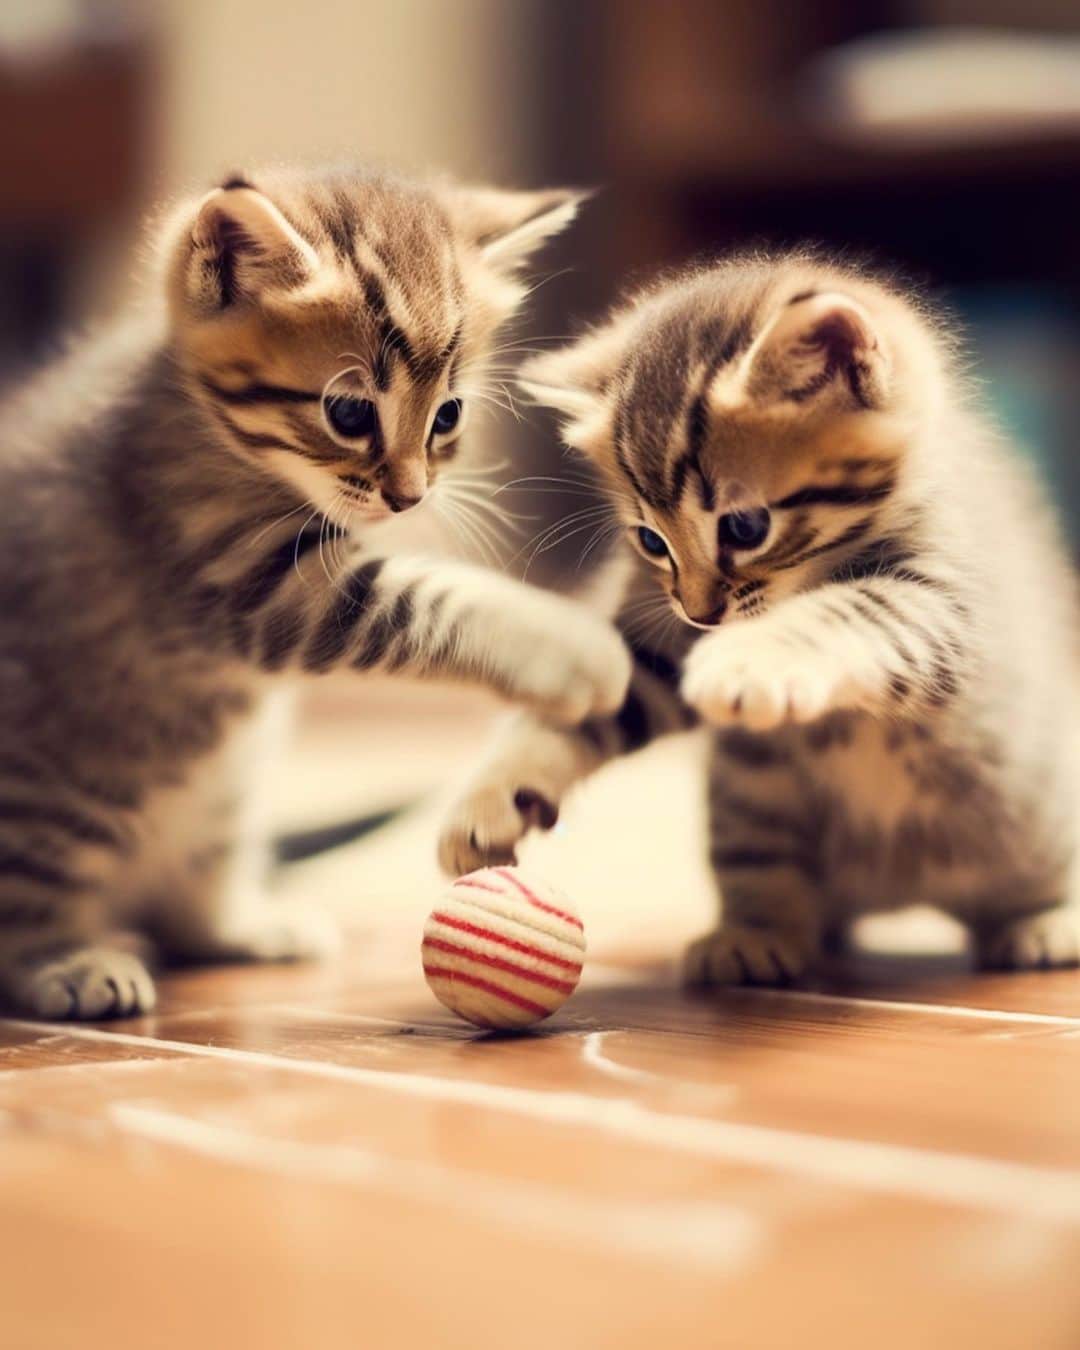 Cute Pets Dogs Catsさんのインスタグラム写真 - (Cute Pets Dogs CatsInstagram)「Playtime ☺️  Credit: @dailycatclub  ** For all crediting issues and removals pls 𝐄𝐦𝐚𝐢𝐥 𝐮𝐬 ☺️  𝐍𝐨𝐭𝐞: we don’t own this video/pics, all rights go to their respective owners. If owner is not provided, tagged (meaning we couldn’t find who is the owner), 𝐩𝐥𝐬 𝐄𝐦𝐚𝐢𝐥 𝐮𝐬 with 𝐬𝐮𝐛𝐣𝐞𝐜𝐭 “𝐂𝐫𝐞𝐝𝐢𝐭 𝐈𝐬𝐬𝐮𝐞𝐬” and 𝐨𝐰𝐧𝐞𝐫 𝐰𝐢𝐥𝐥 𝐛𝐞 𝐭𝐚𝐠𝐠𝐞𝐝 𝐬𝐡𝐨𝐫𝐭𝐥𝐲 𝐚𝐟𝐭𝐞𝐫.  We have been building this community for over 6 years, but 𝐞𝐯𝐞𝐫𝐲 𝐫𝐞𝐩𝐨𝐫𝐭 𝐜𝐨𝐮𝐥𝐝 𝐠𝐞𝐭 𝐨𝐮𝐫 𝐩𝐚𝐠𝐞 𝐝𝐞𝐥𝐞𝐭𝐞𝐝, pls email us first. **」9月16日 20時56分 - dailycatclub